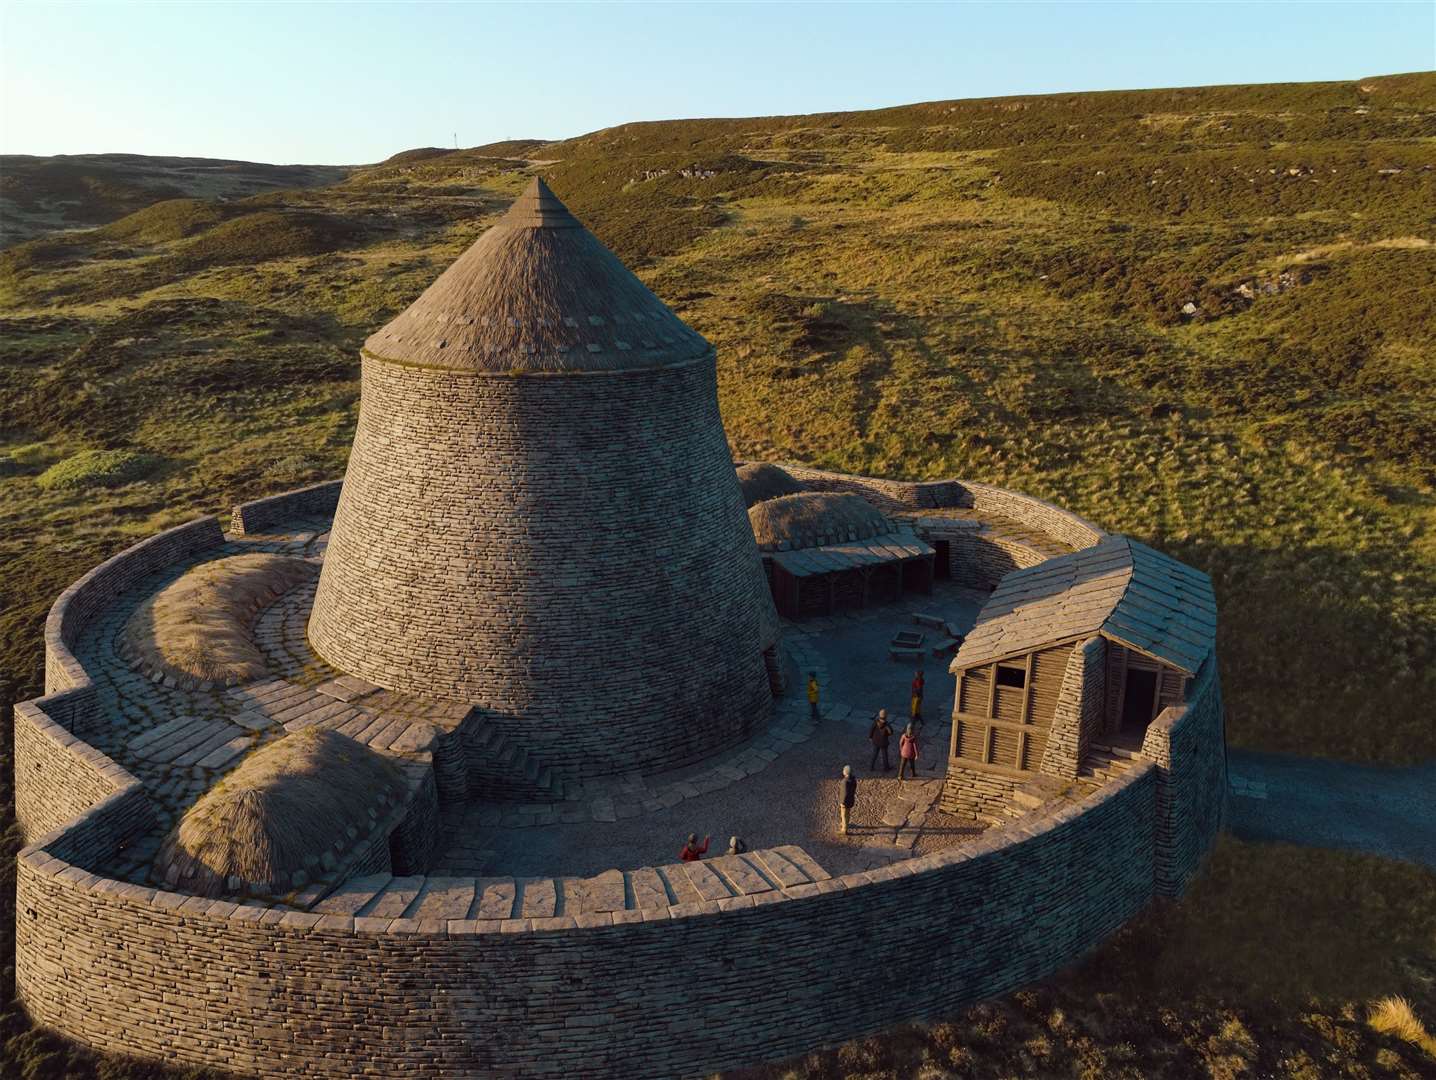 An artist's impression of how the finished broch could look.